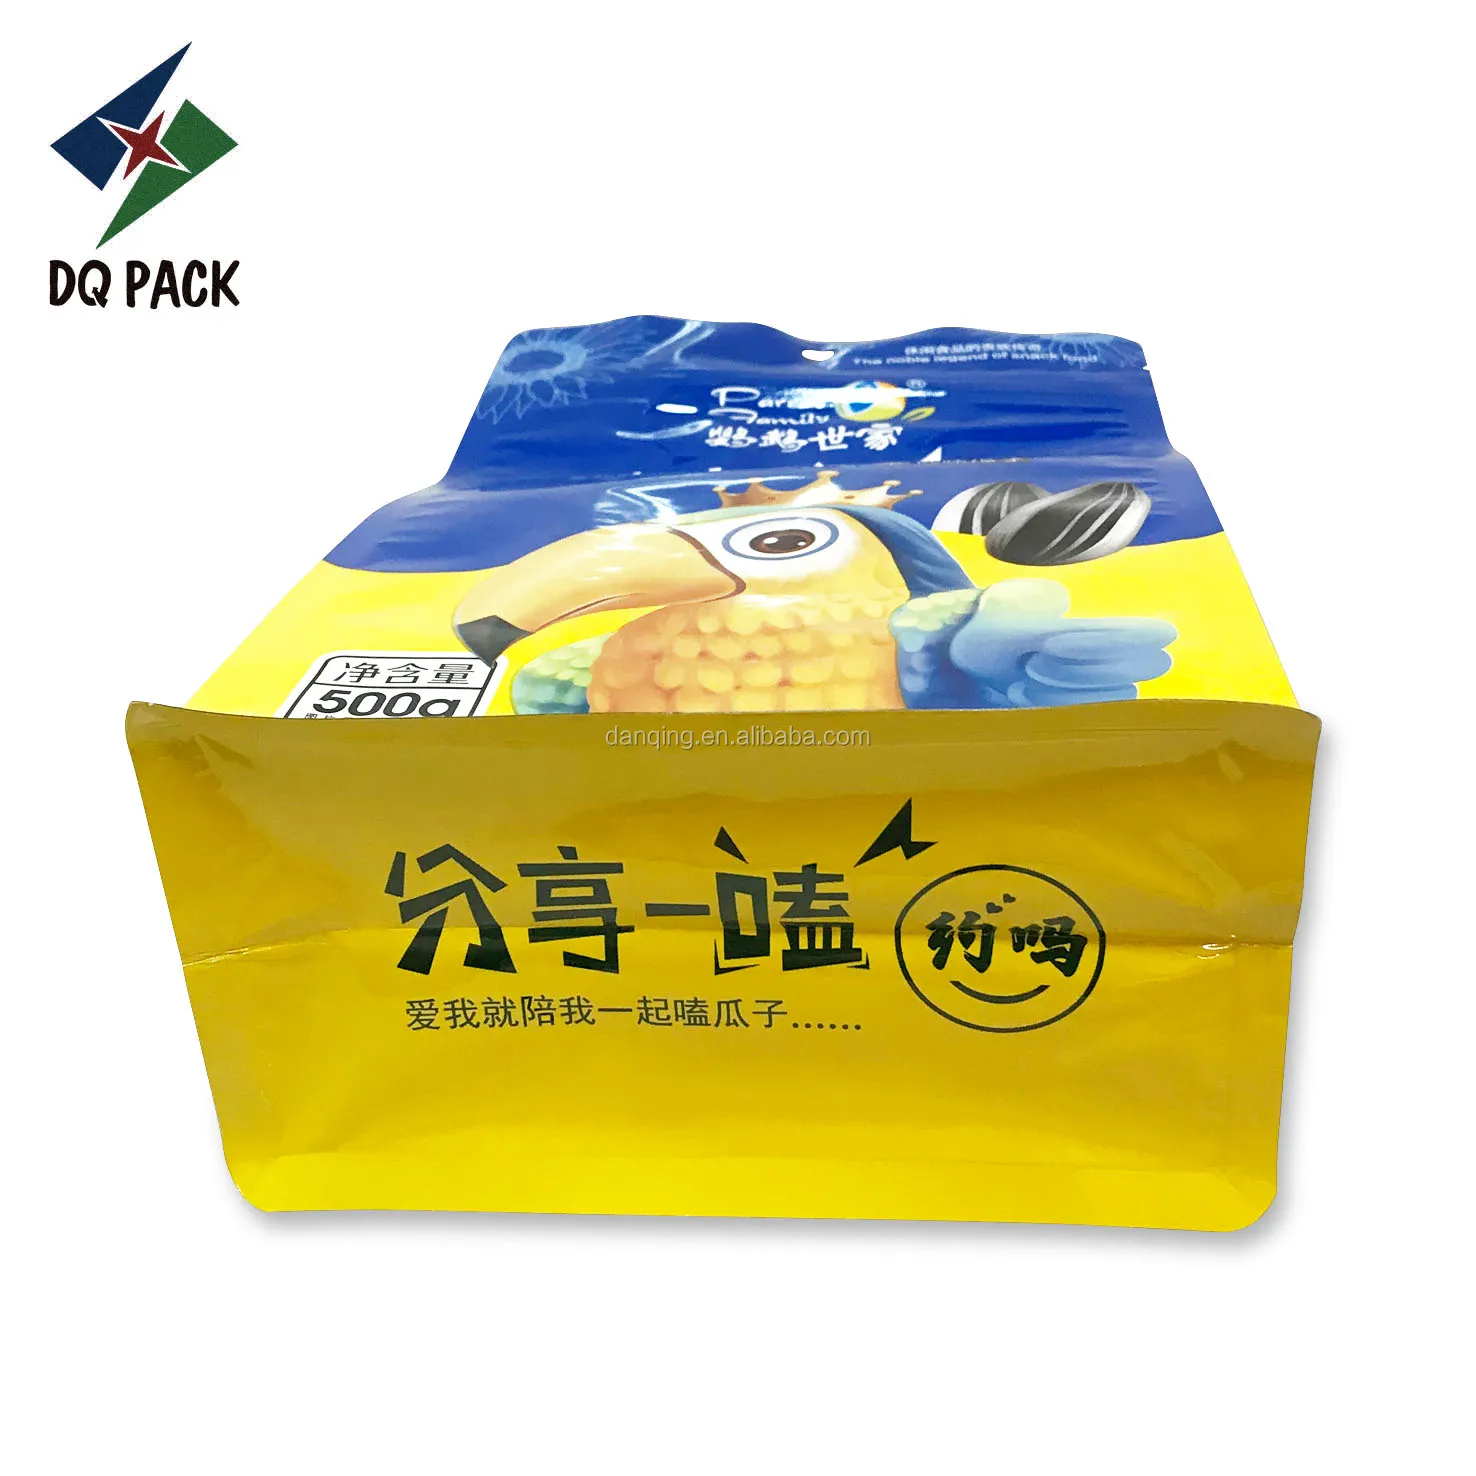 DQ PACK Customized Printing Green Tea Coffee Powder Flat Bottom Doypack With Zipper